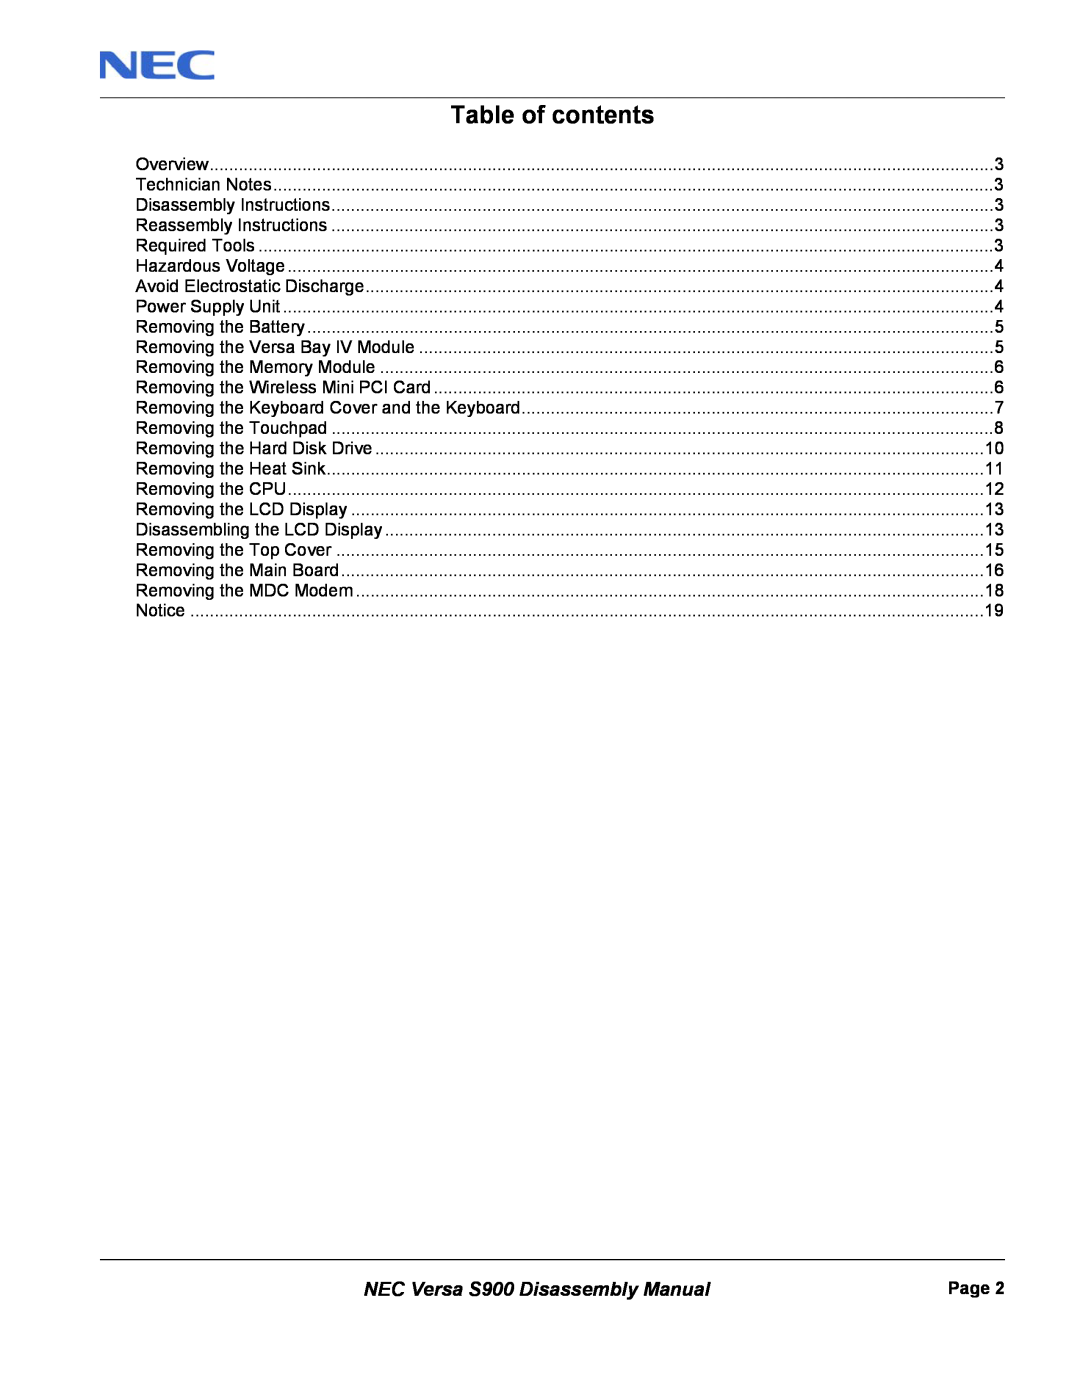 NEC manual Table of contents, NEC Versa S900 Disassembly Manual 